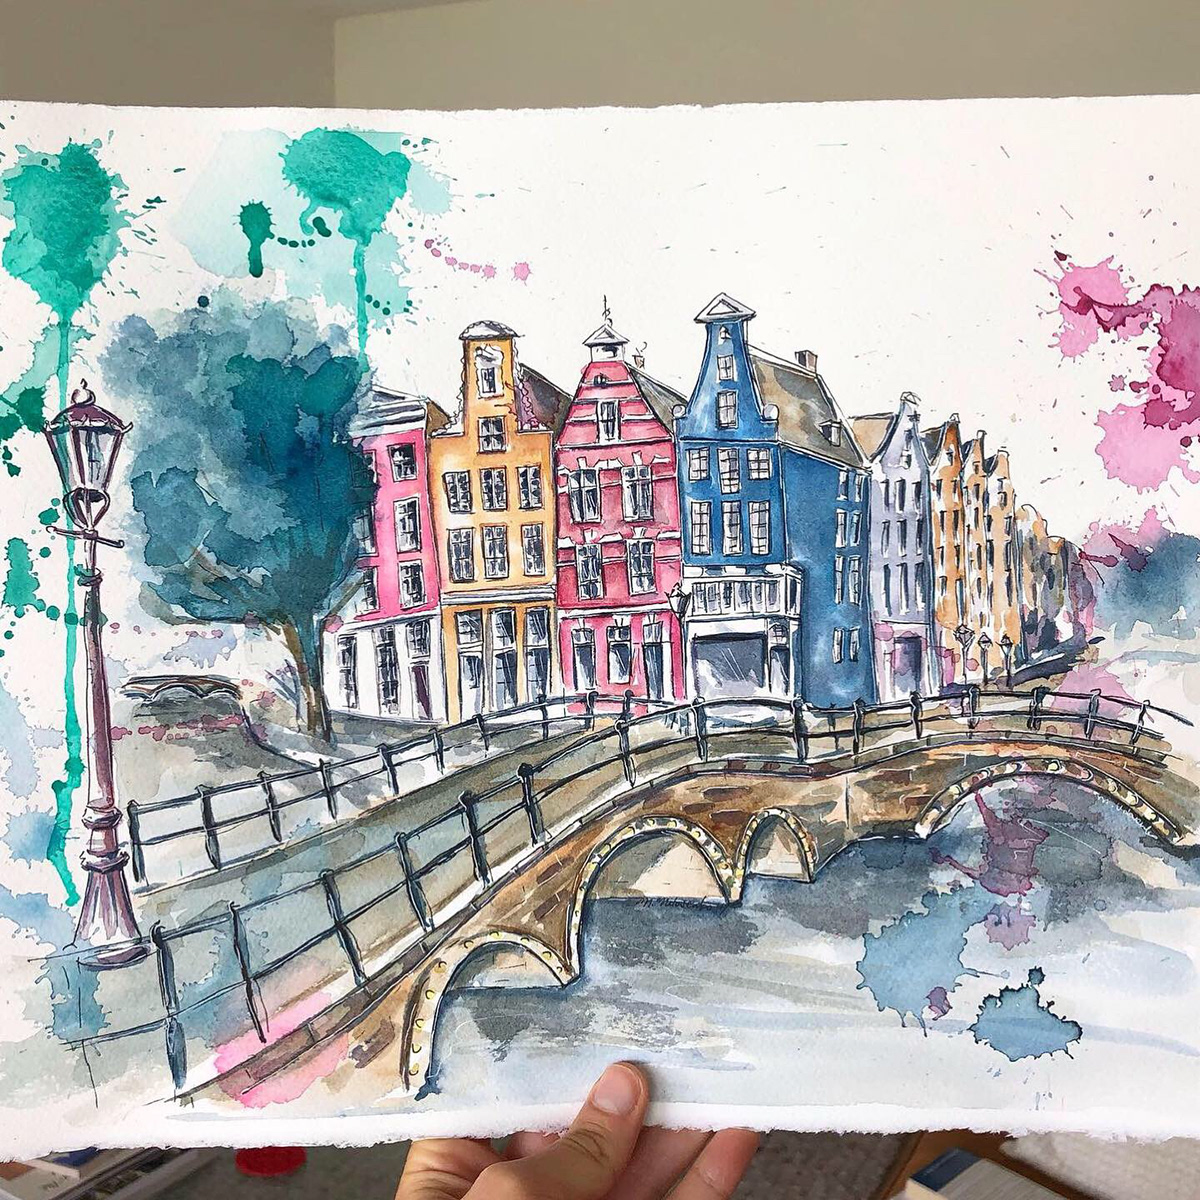 watercolor art commission art Amsterdam canals watercolor amsterdam whimsical art city painting architecture art city art Editorial Illustration watercolor illustration